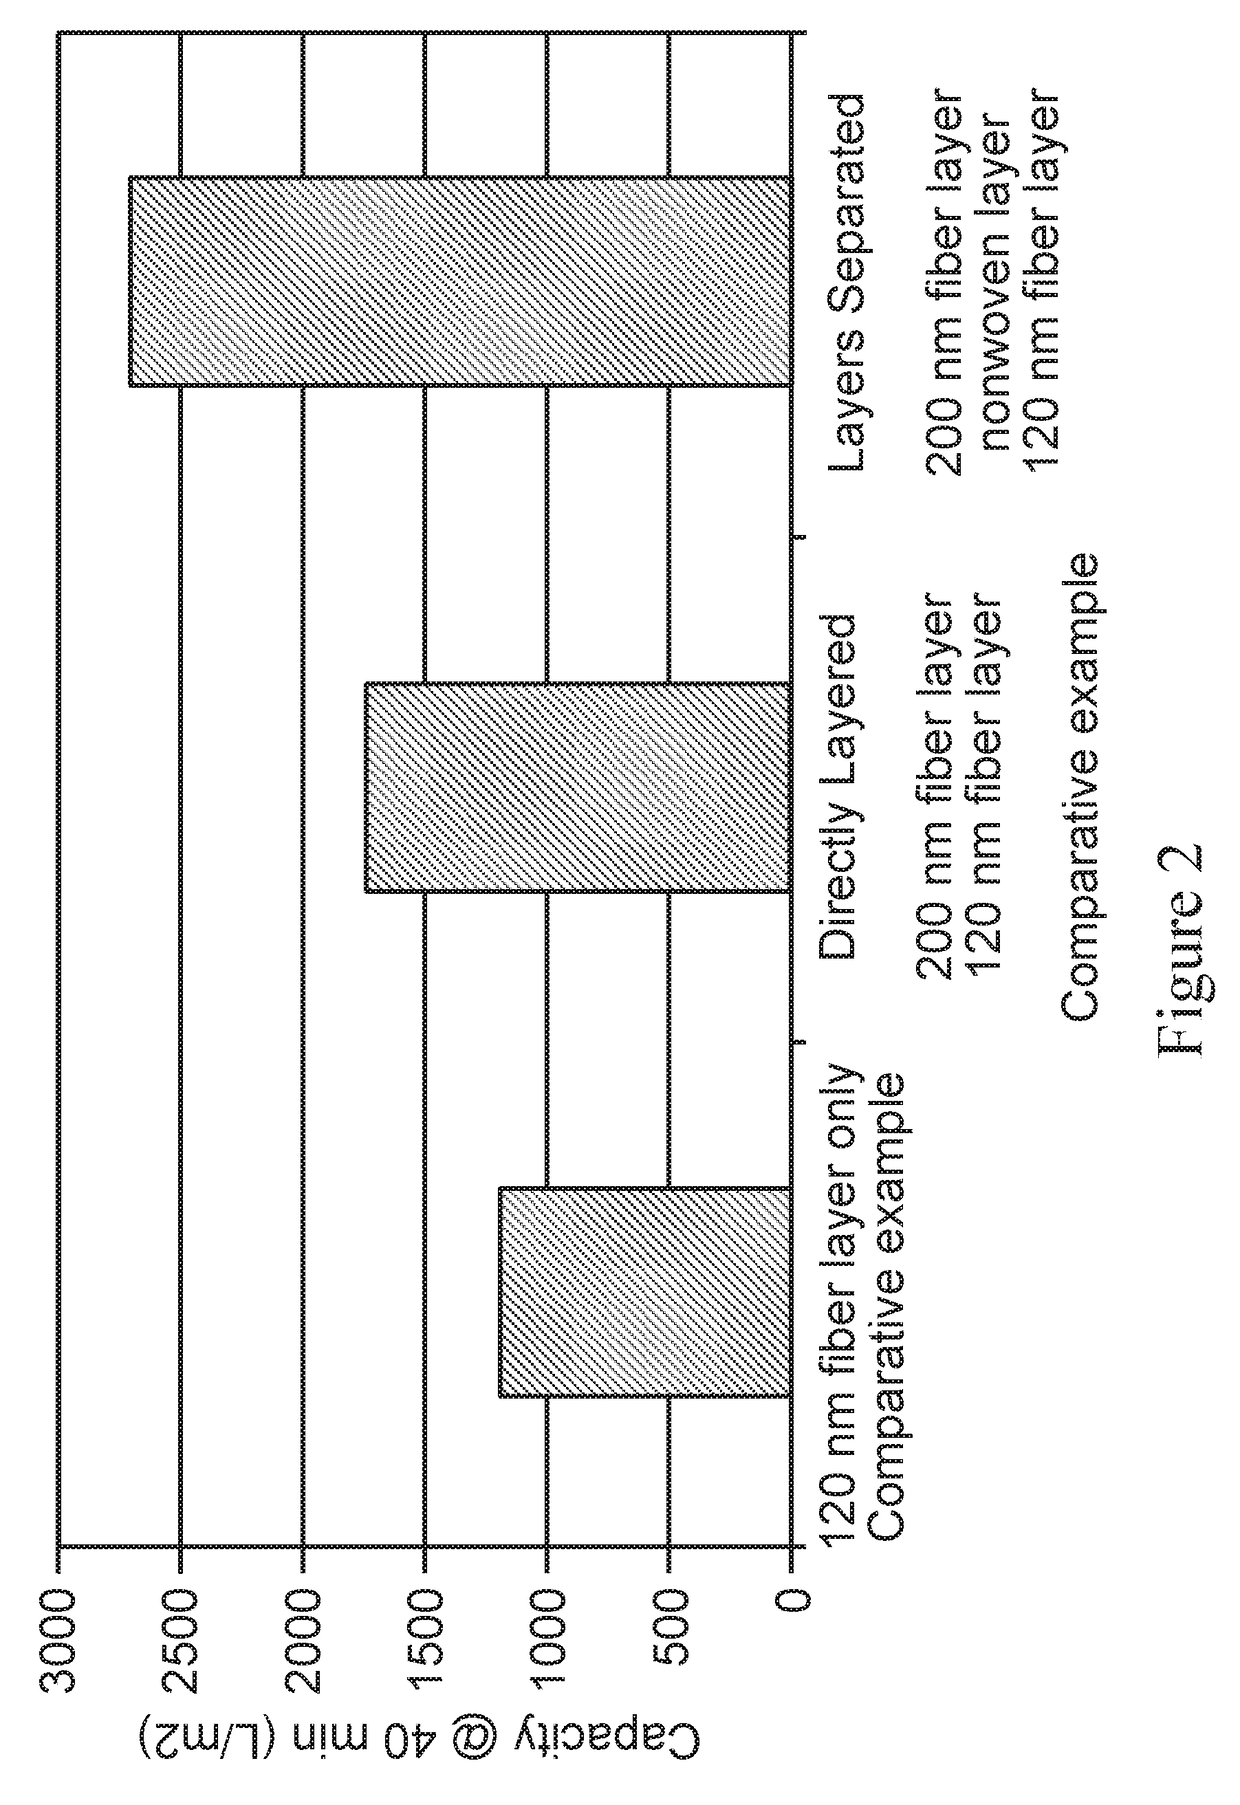 Filter structure with enhanced dirt holding capacity